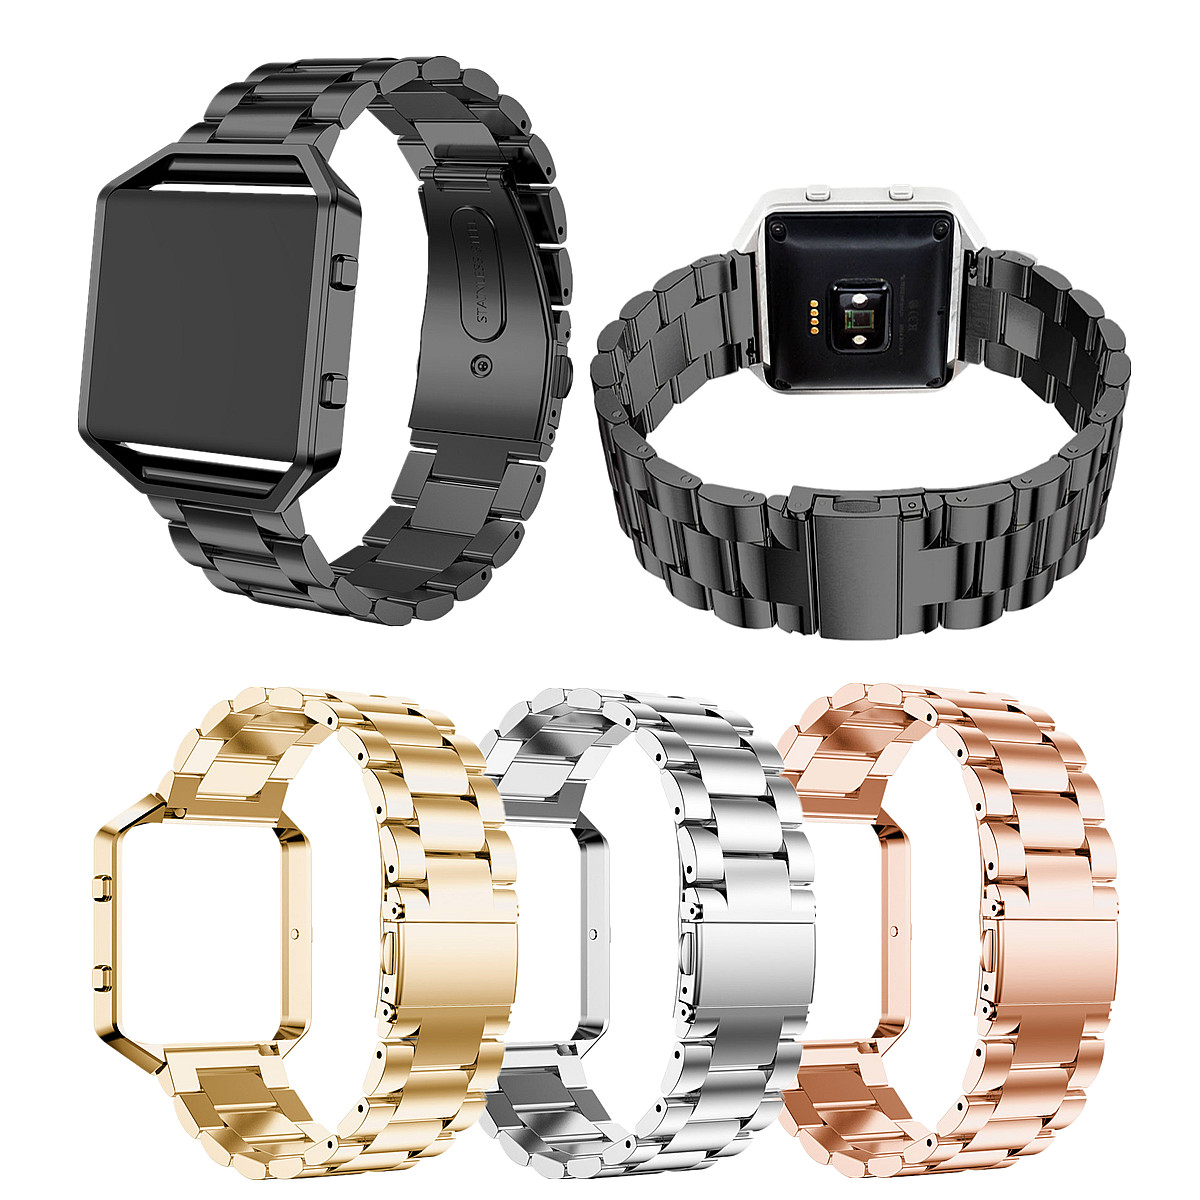 Find Bakeey Steel Metal Frame Watch Case Cover Frame Watch Band For Fitbit Blaze Watch for Sale on Gipsybee.com with cryptocurrencies